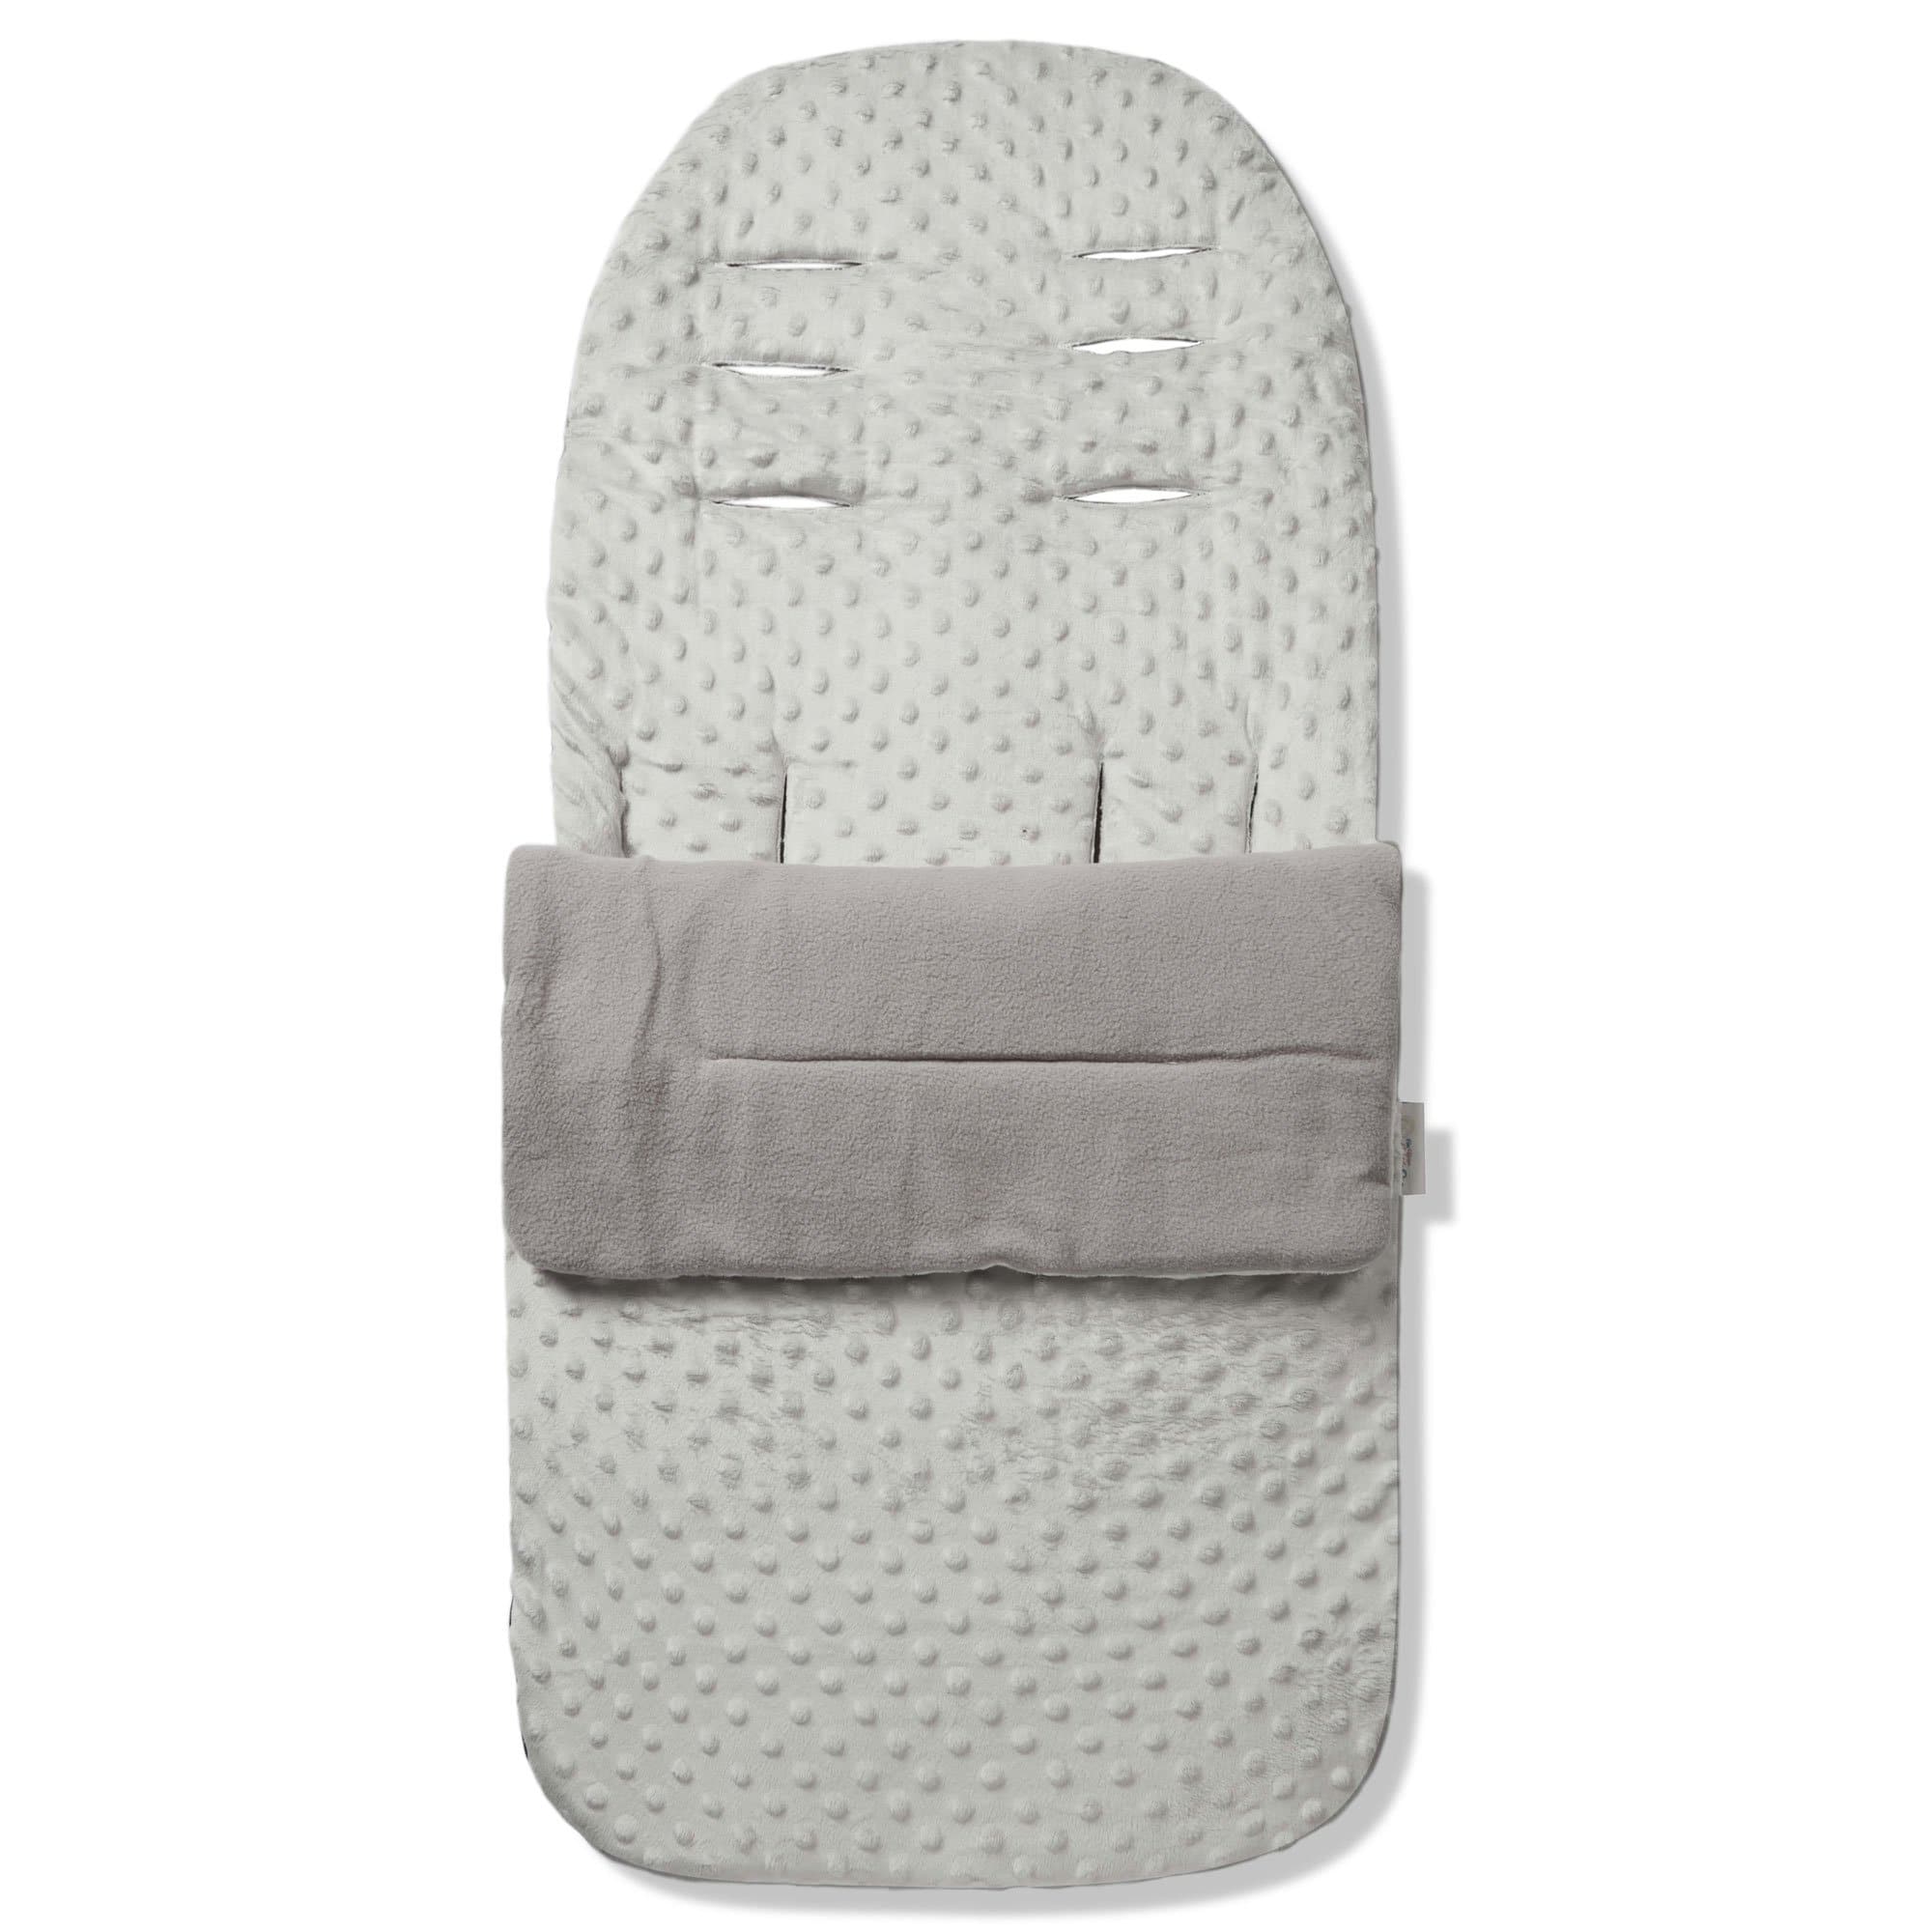 Dimple Footmuff / Cosy Toes Compatible with Graco - For Your Little One